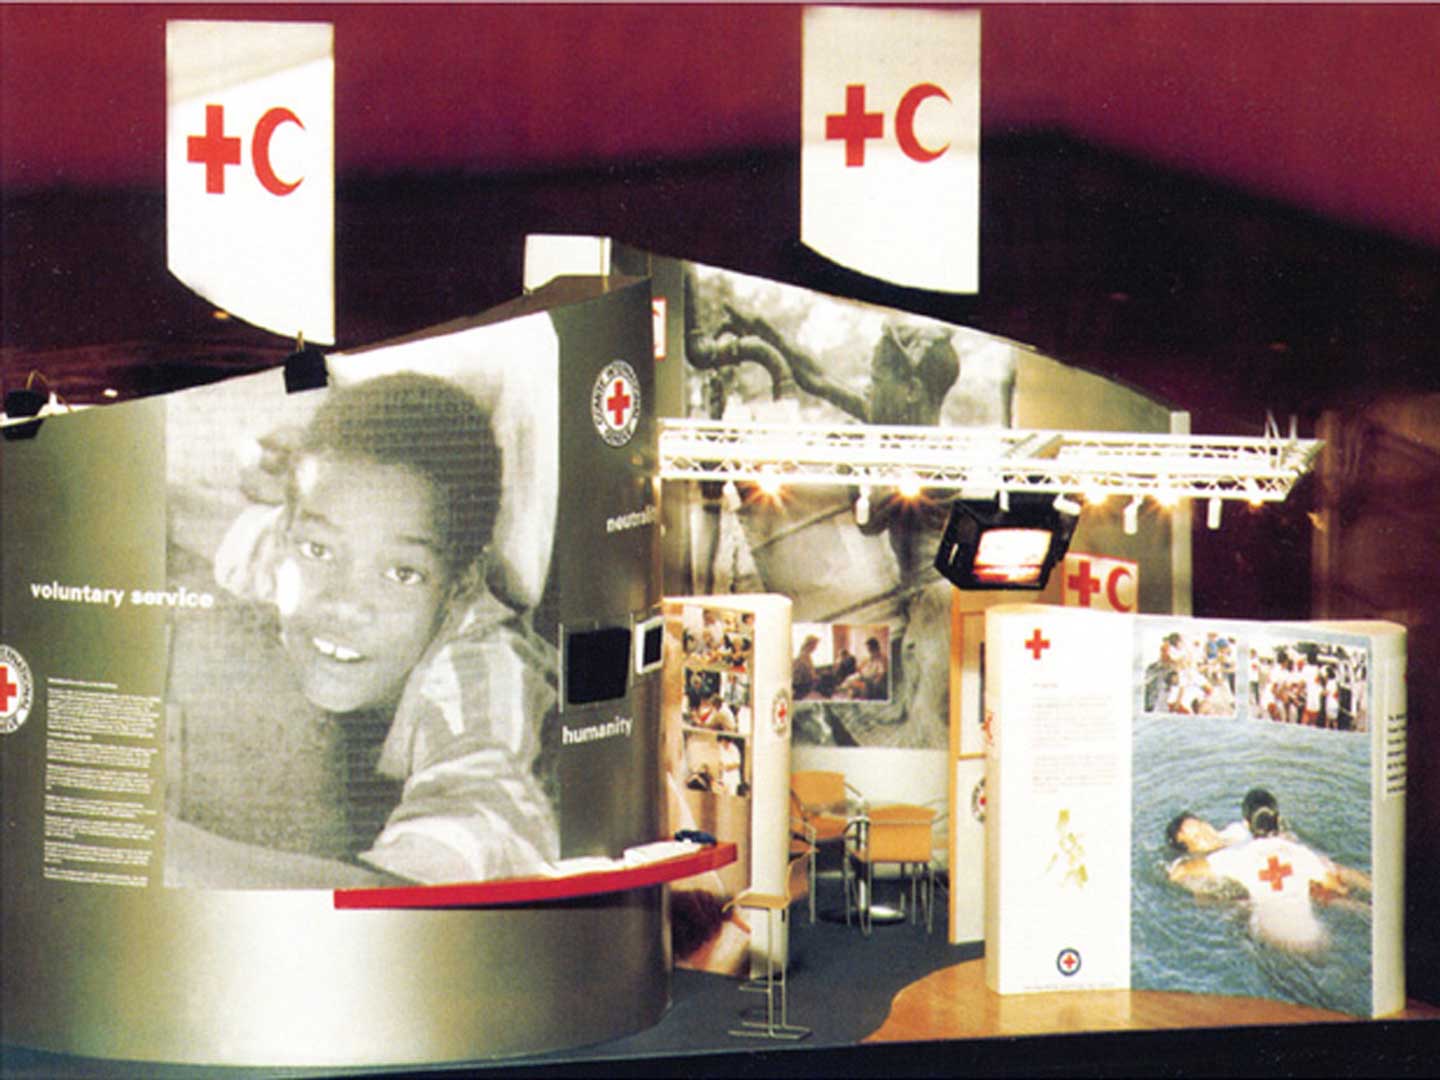 Exhibition stand for the Red Cross - France